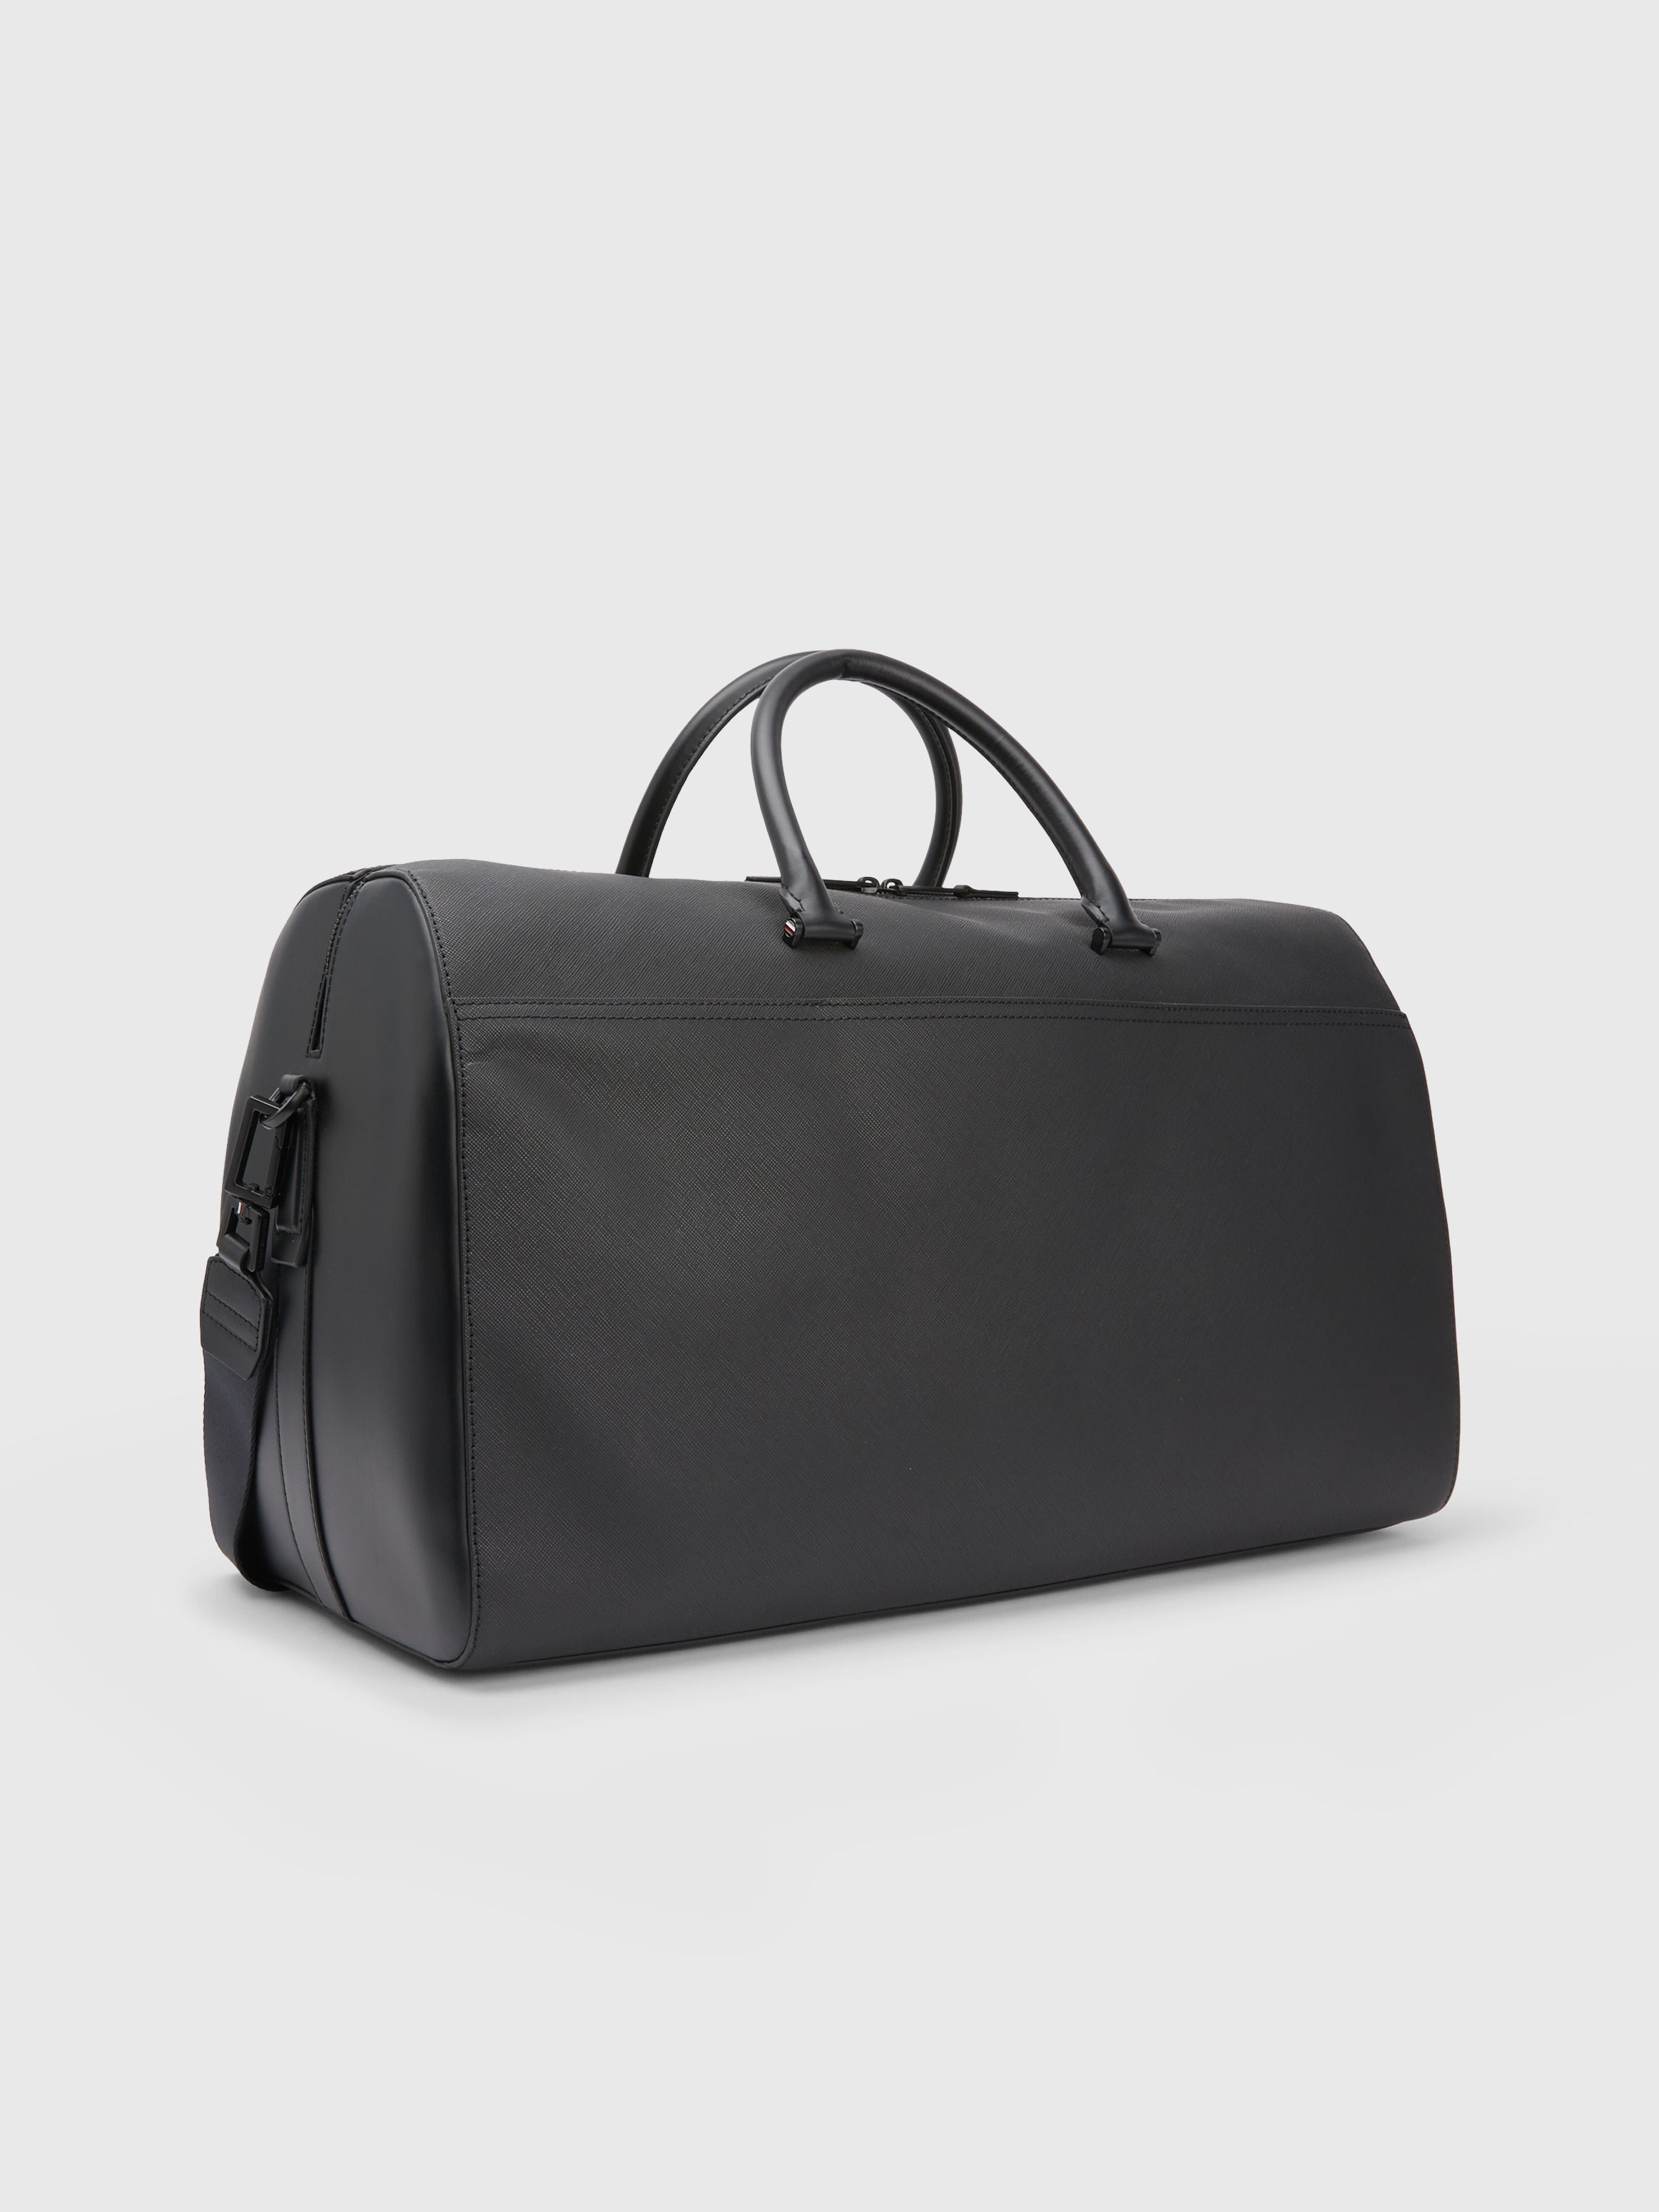 TH Business Leather Duffel Bag | Tommy Hilfiger